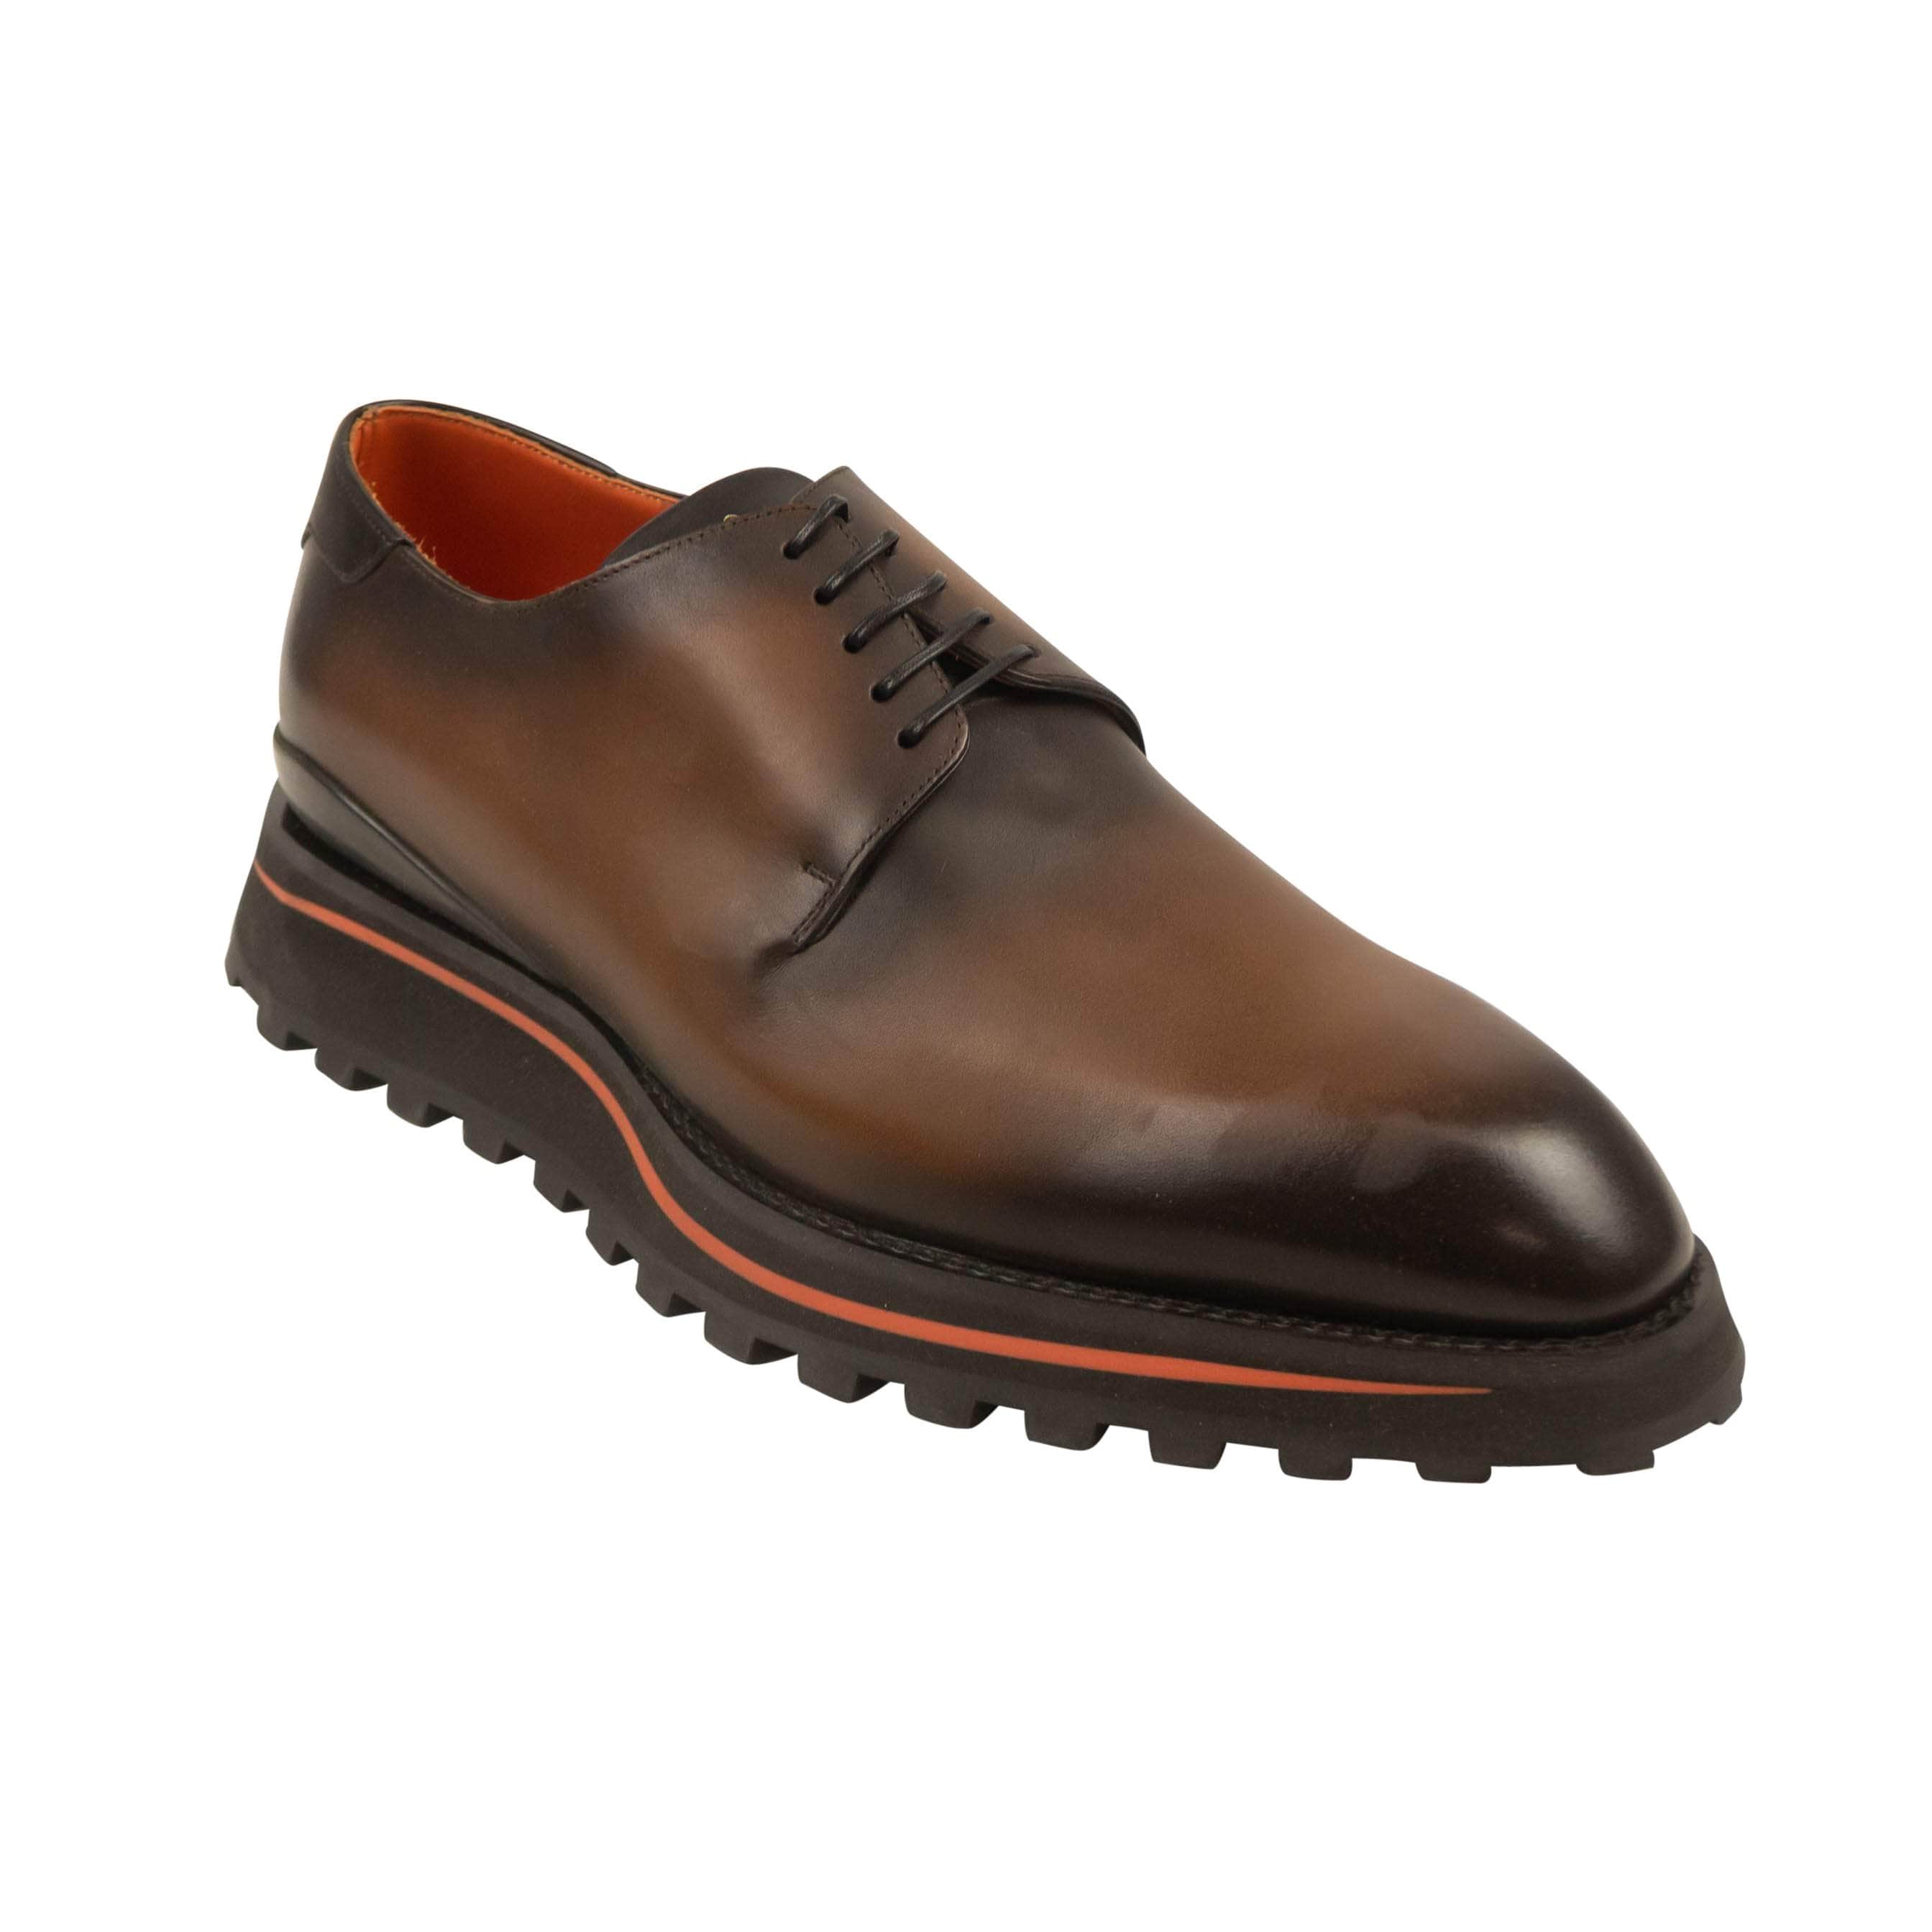 Louis Vuitton 500-750, channelenable-all, chicmi, couponcollection, gender-mens, main-shoes, mens-oxfords-derby-shoes, mens-shoes, size-6-5, SPO, stadiumgoods 6.5 Brown Leather Lace Up Derby Shoes 95-LVT-2024/6.5 95-LVT-2024/6.5